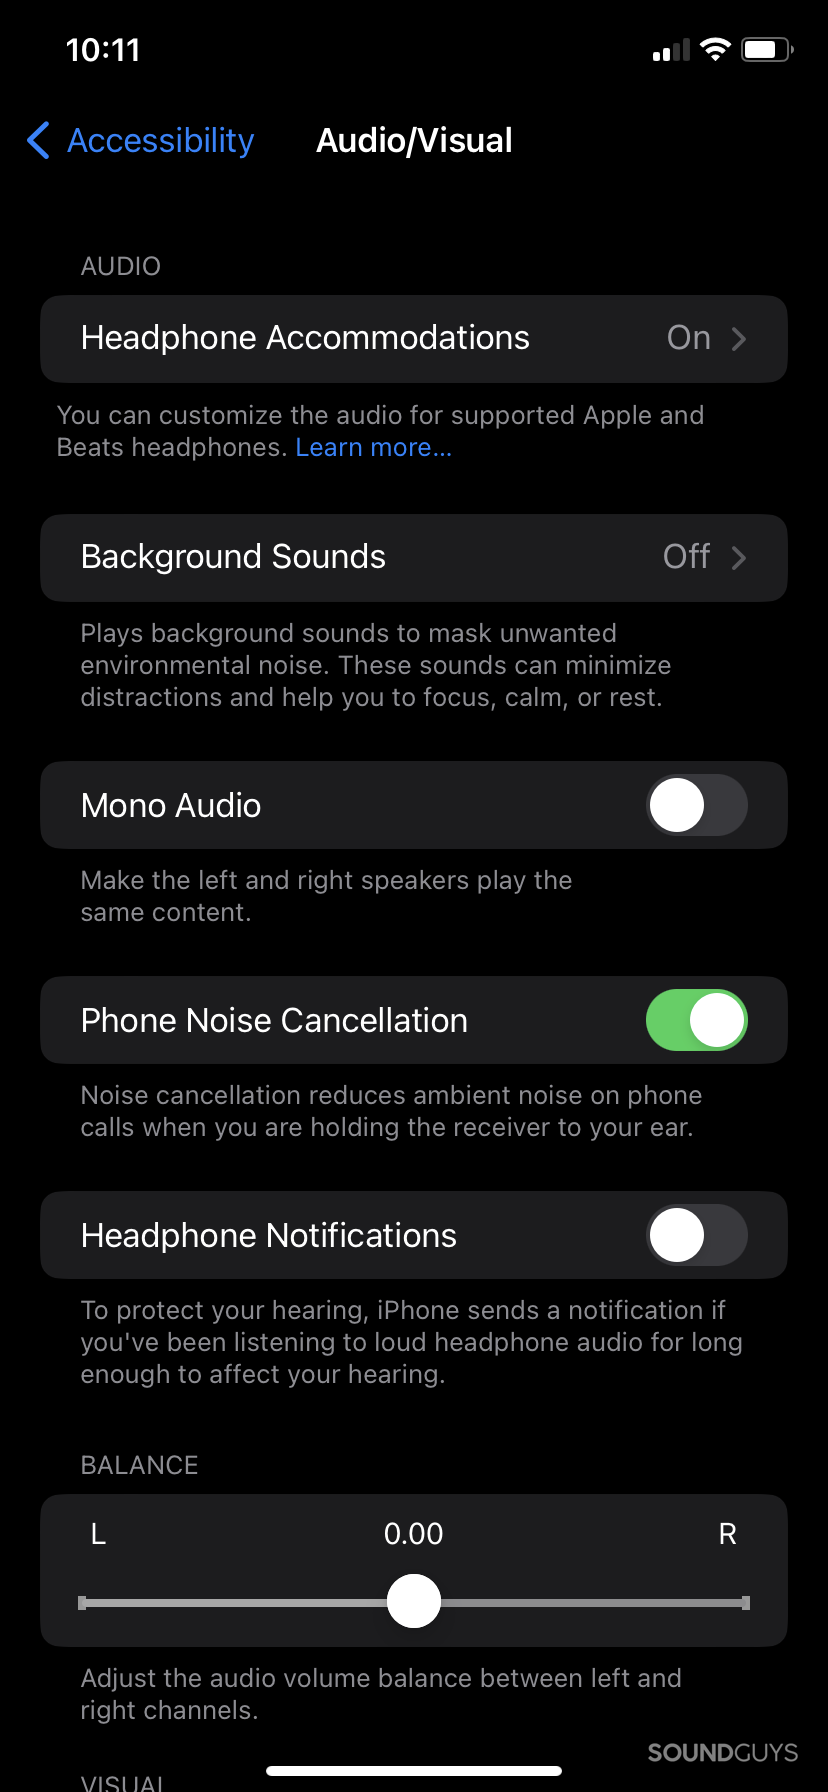 The Audio Visual settings menu in the iOS Settings app, showing the headphone accommodations toggle button.